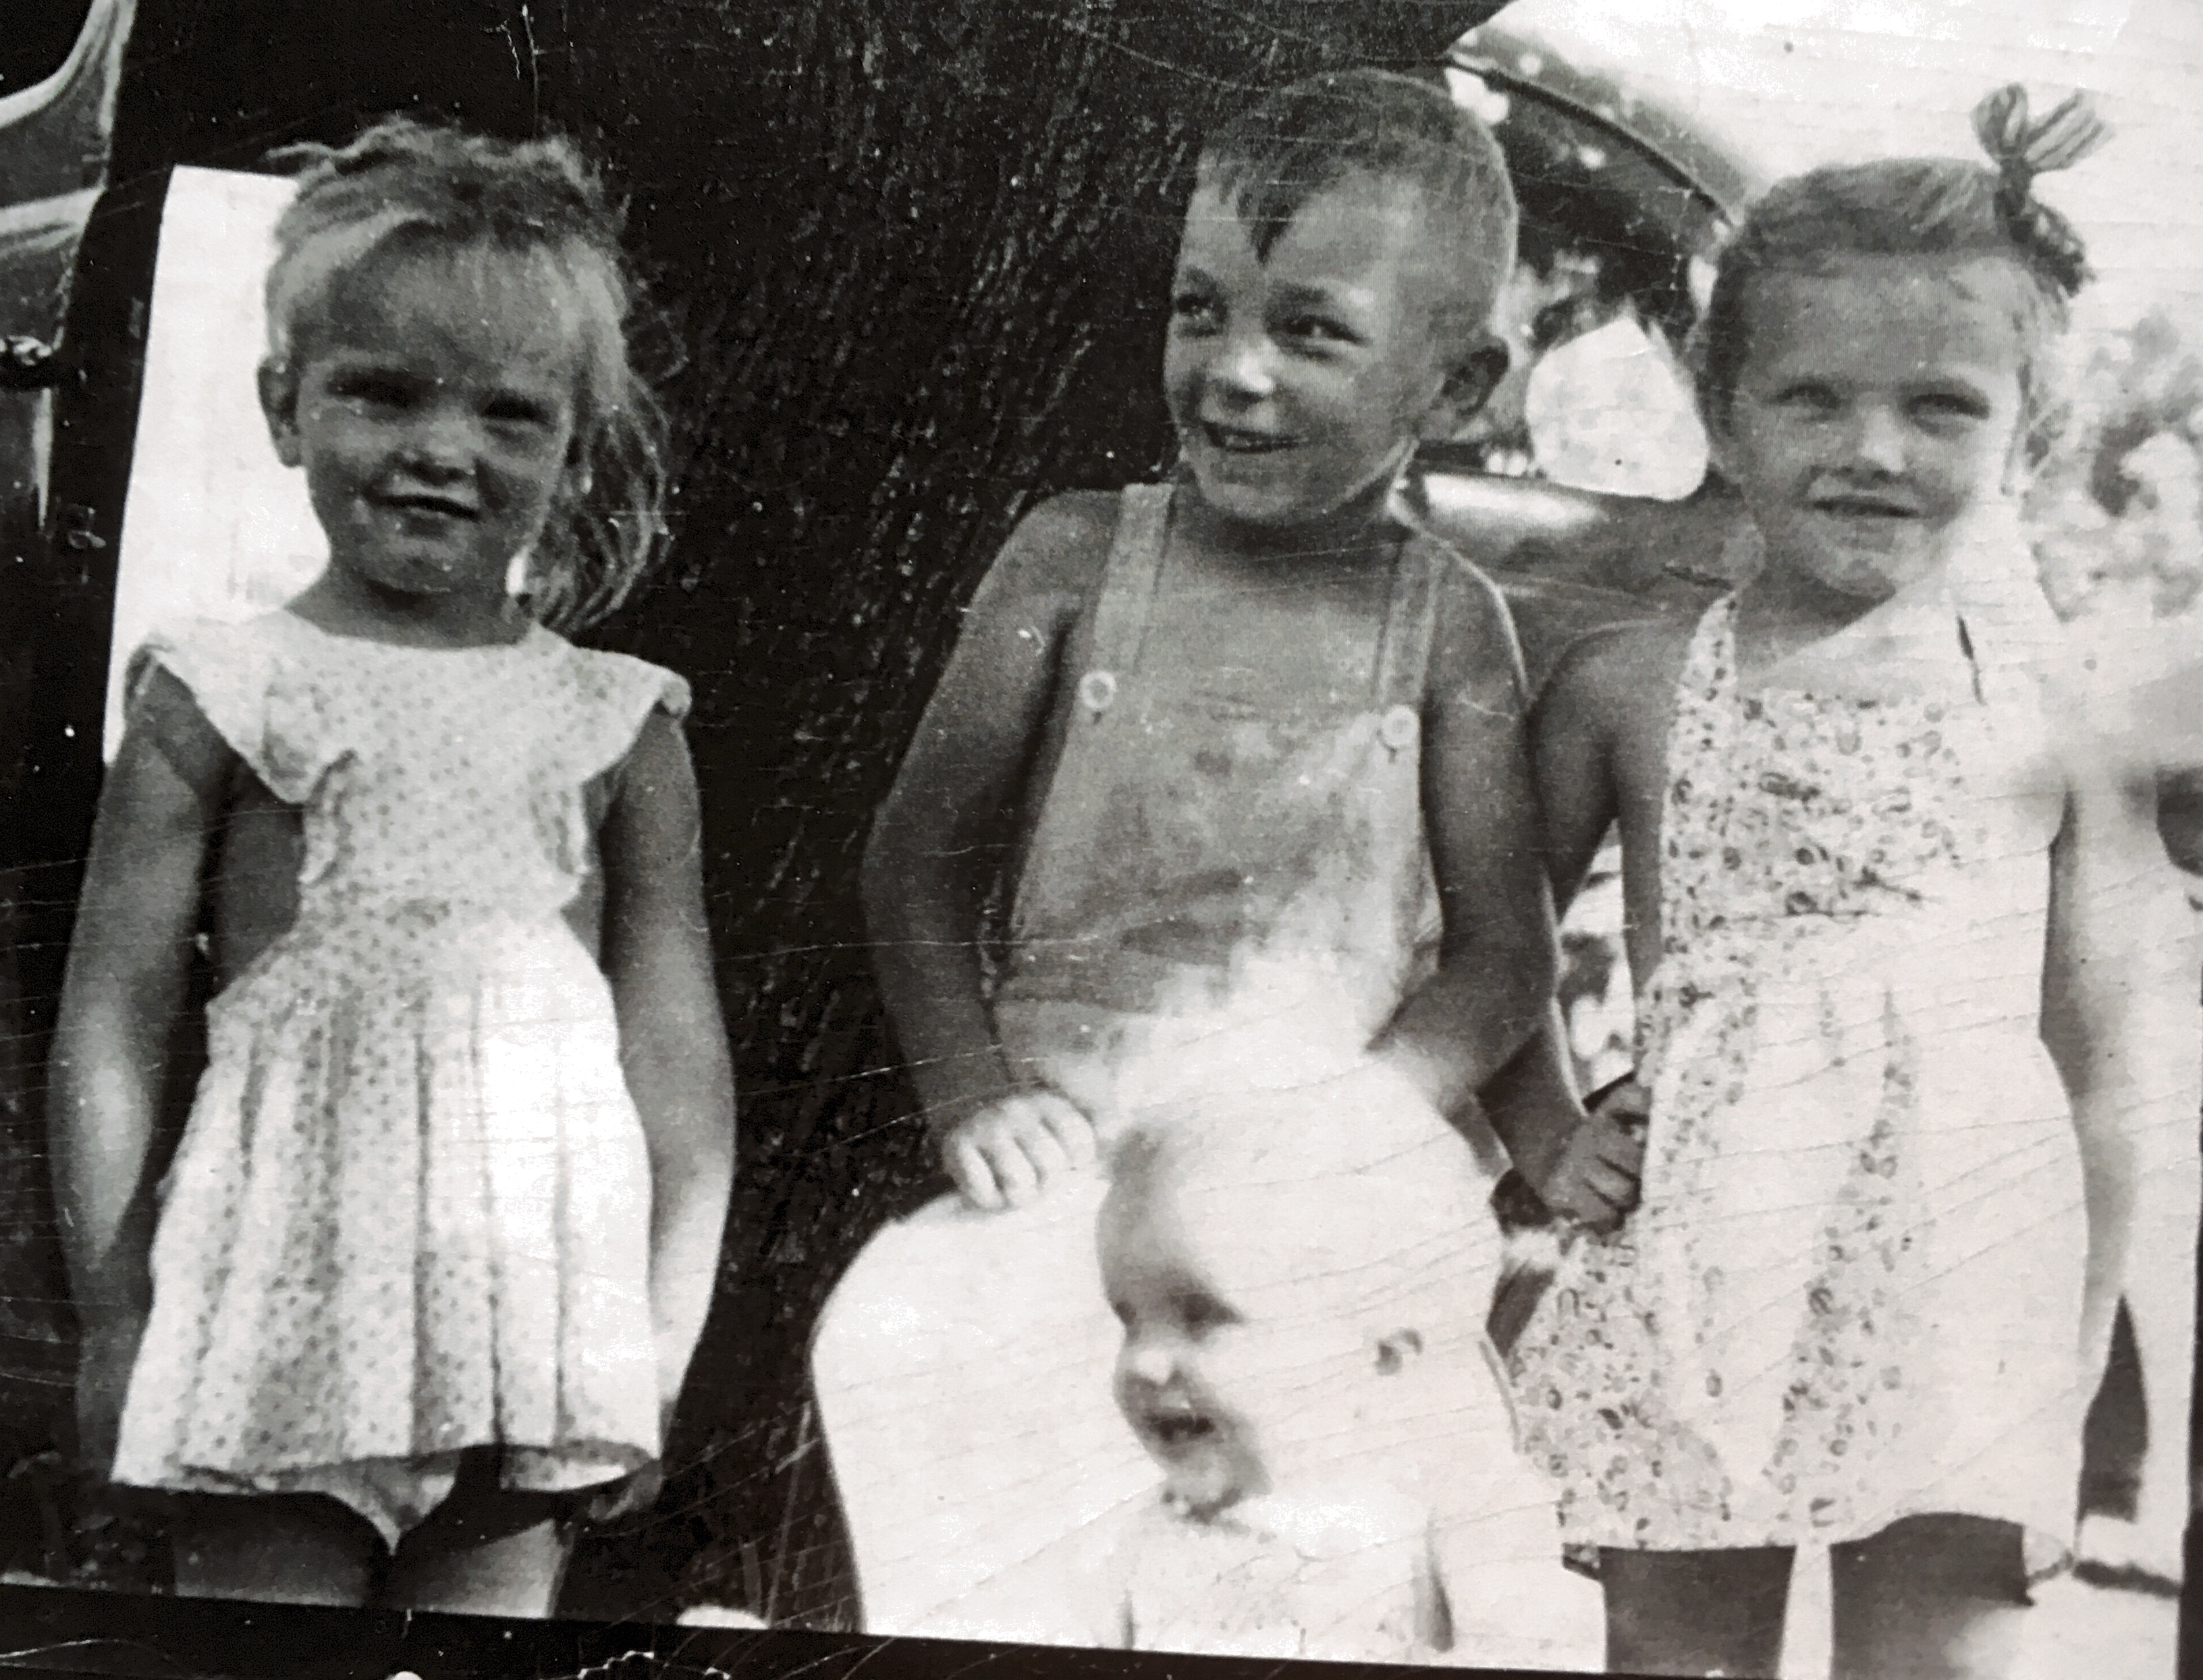 Fleming Cousins
L to R 
Diane Fleming Quince, Dick Stufflebeem, Connie Fleming Huebsch., baby Linda Fleming Payne 1947?